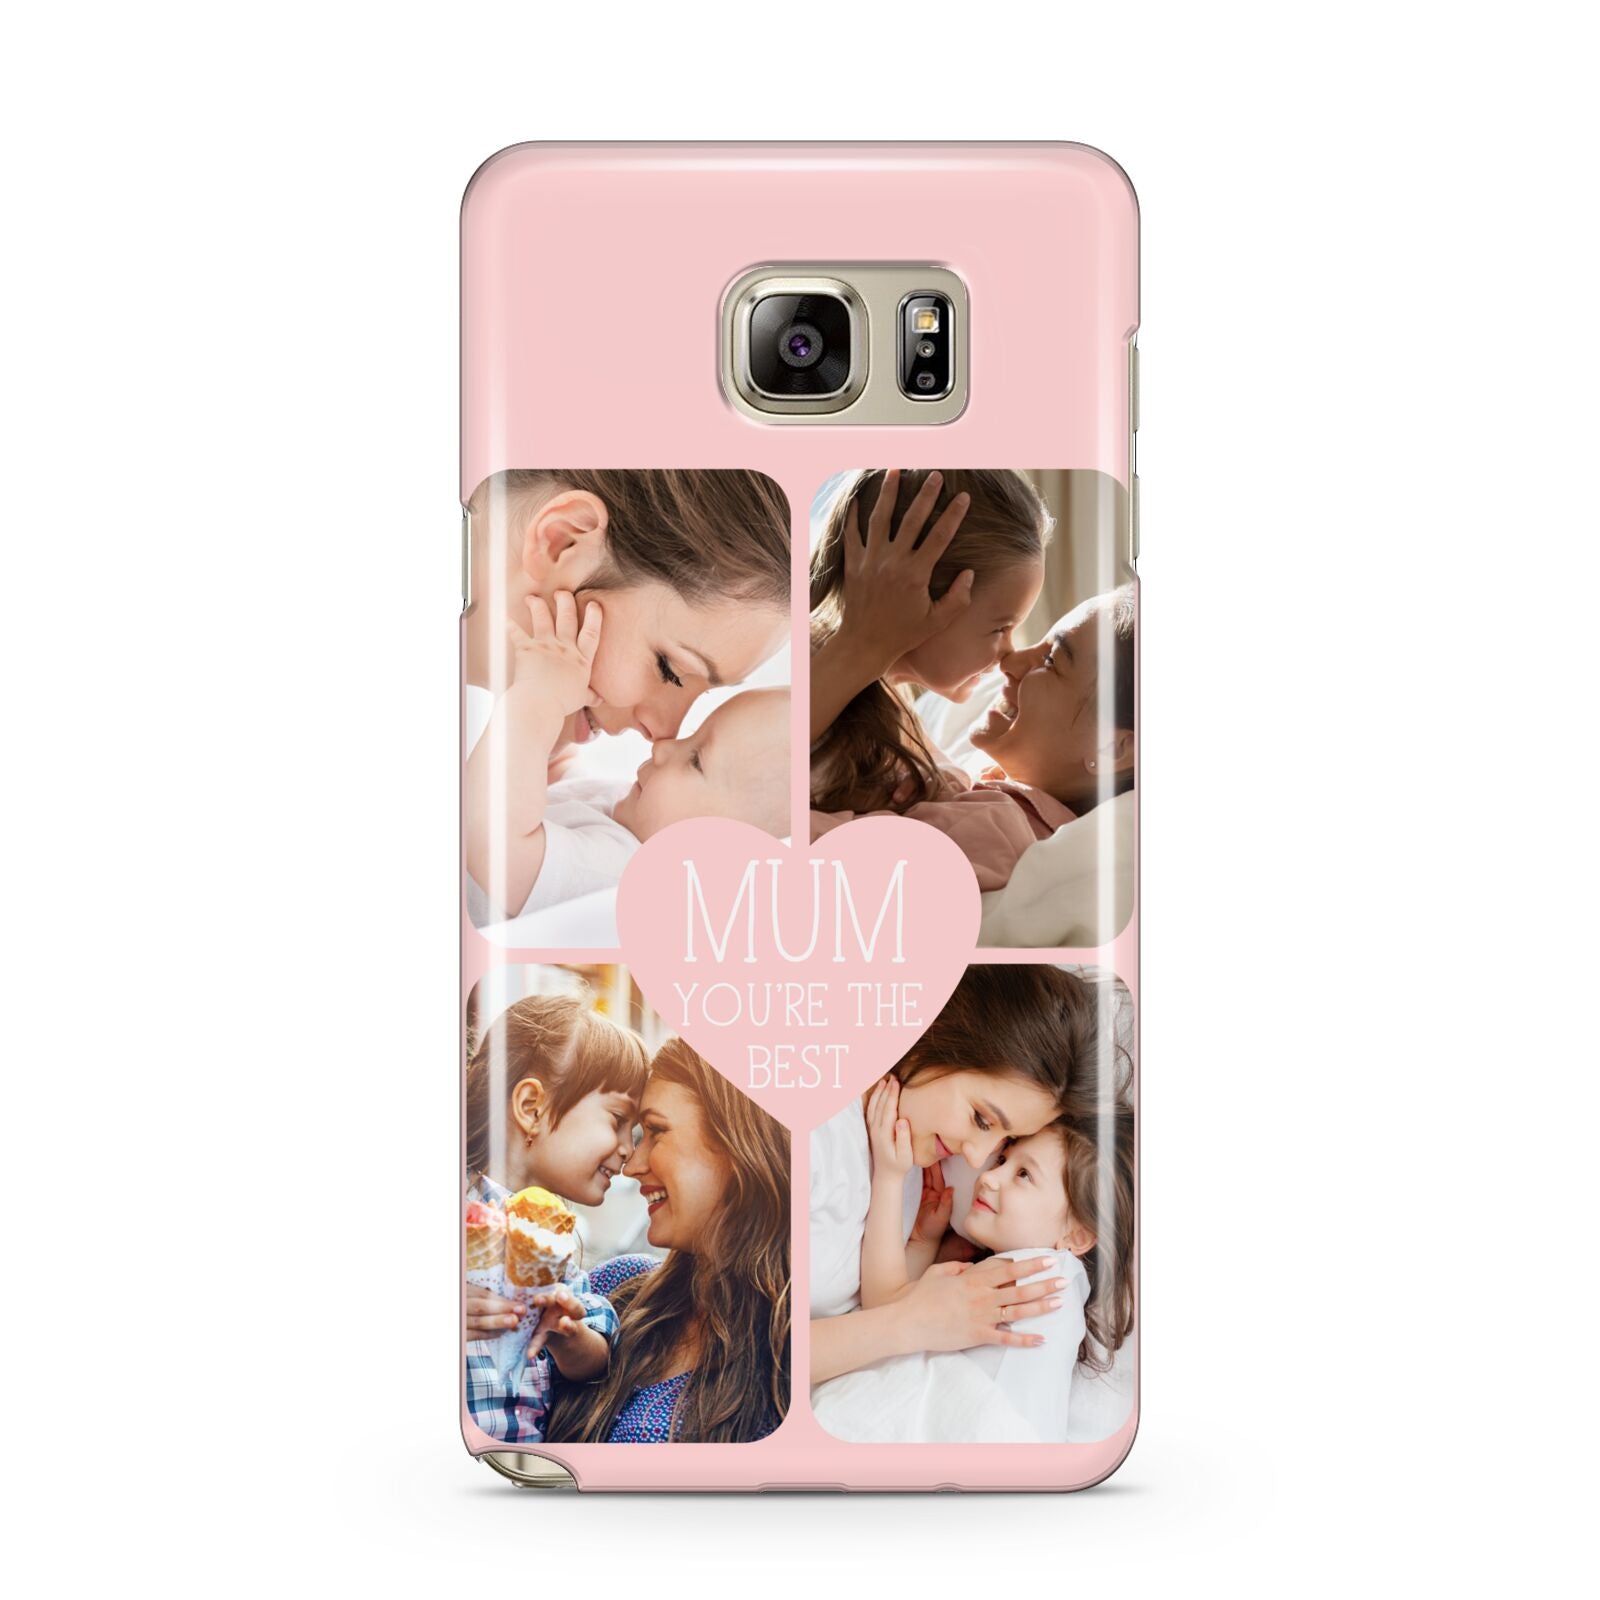 Mothers Day Four Photo Upload Samsung Galaxy Note 5 Case